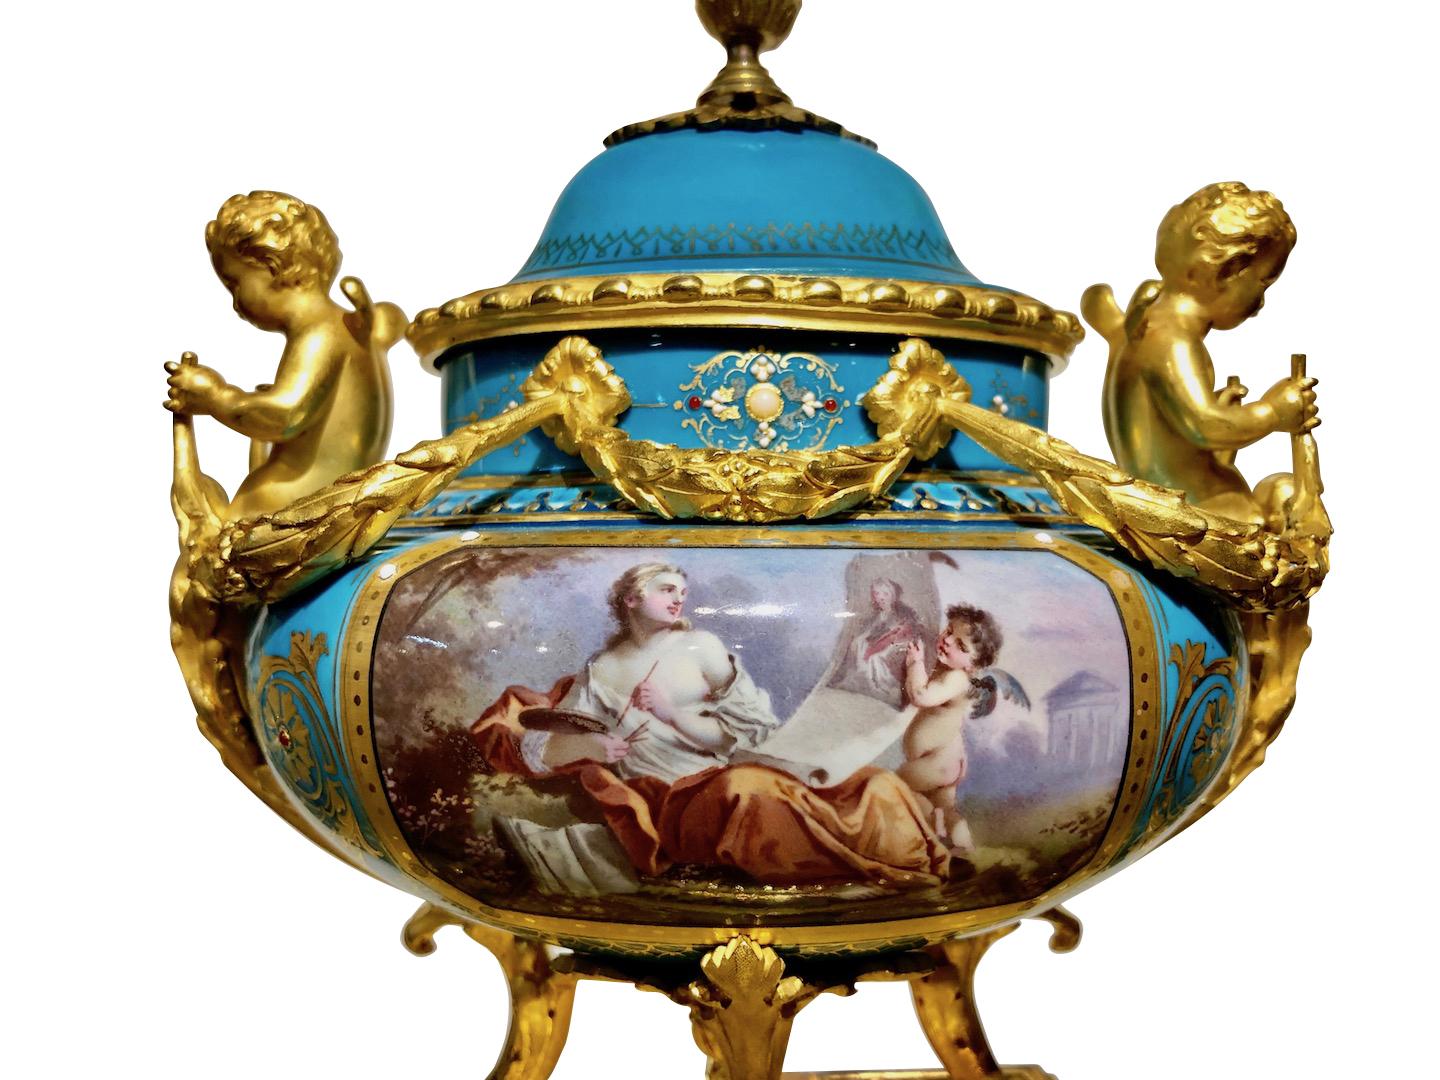 Porcelain 19th Century Ormolu Bronze and Sevres Jeweled Clock Set by H. Picard/Deniere